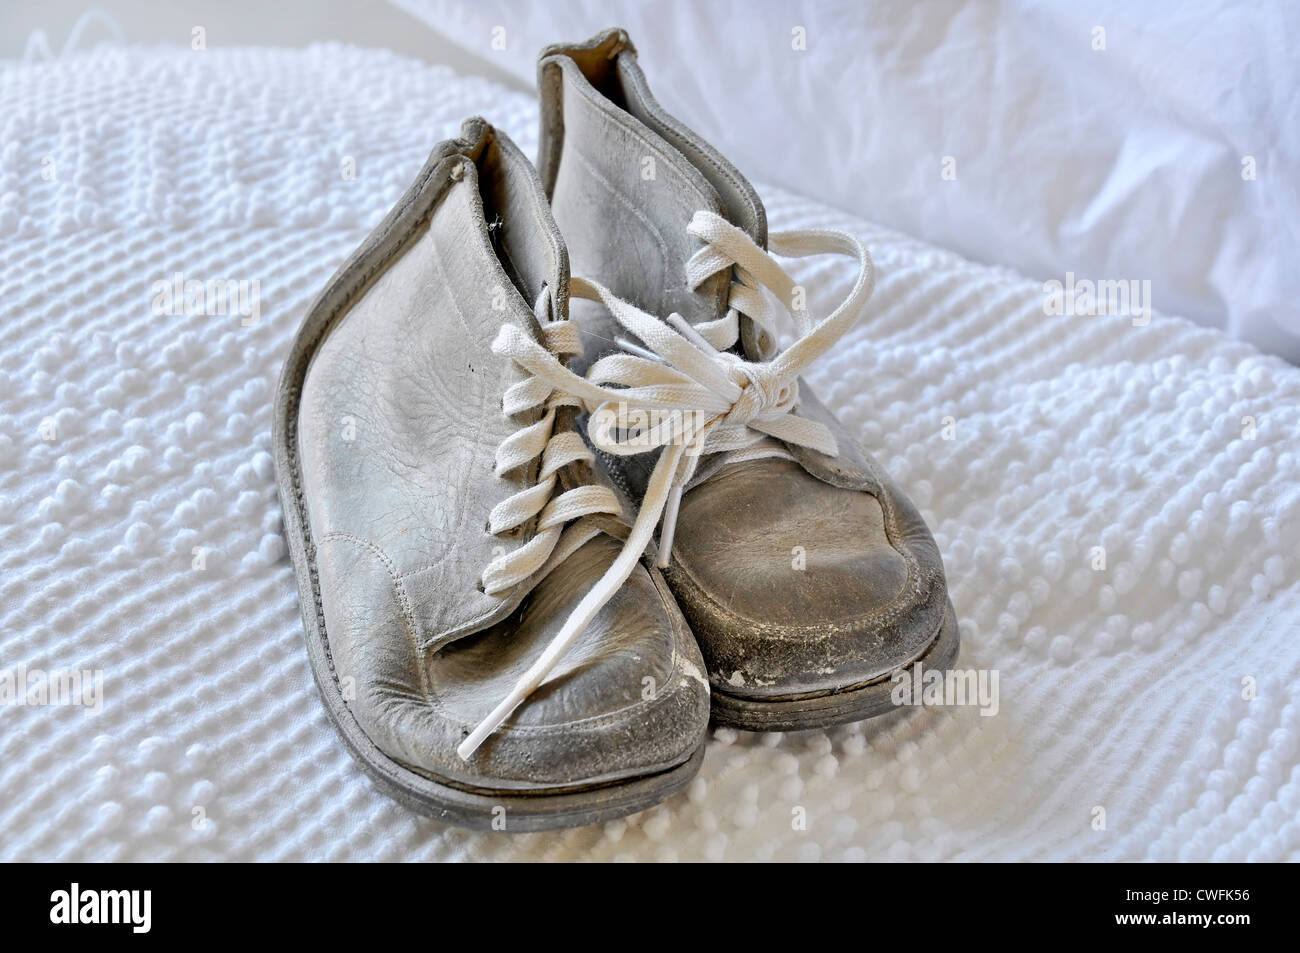 Old Worn Baby Shoes High Resolution Stock Photography and Images - Alamy